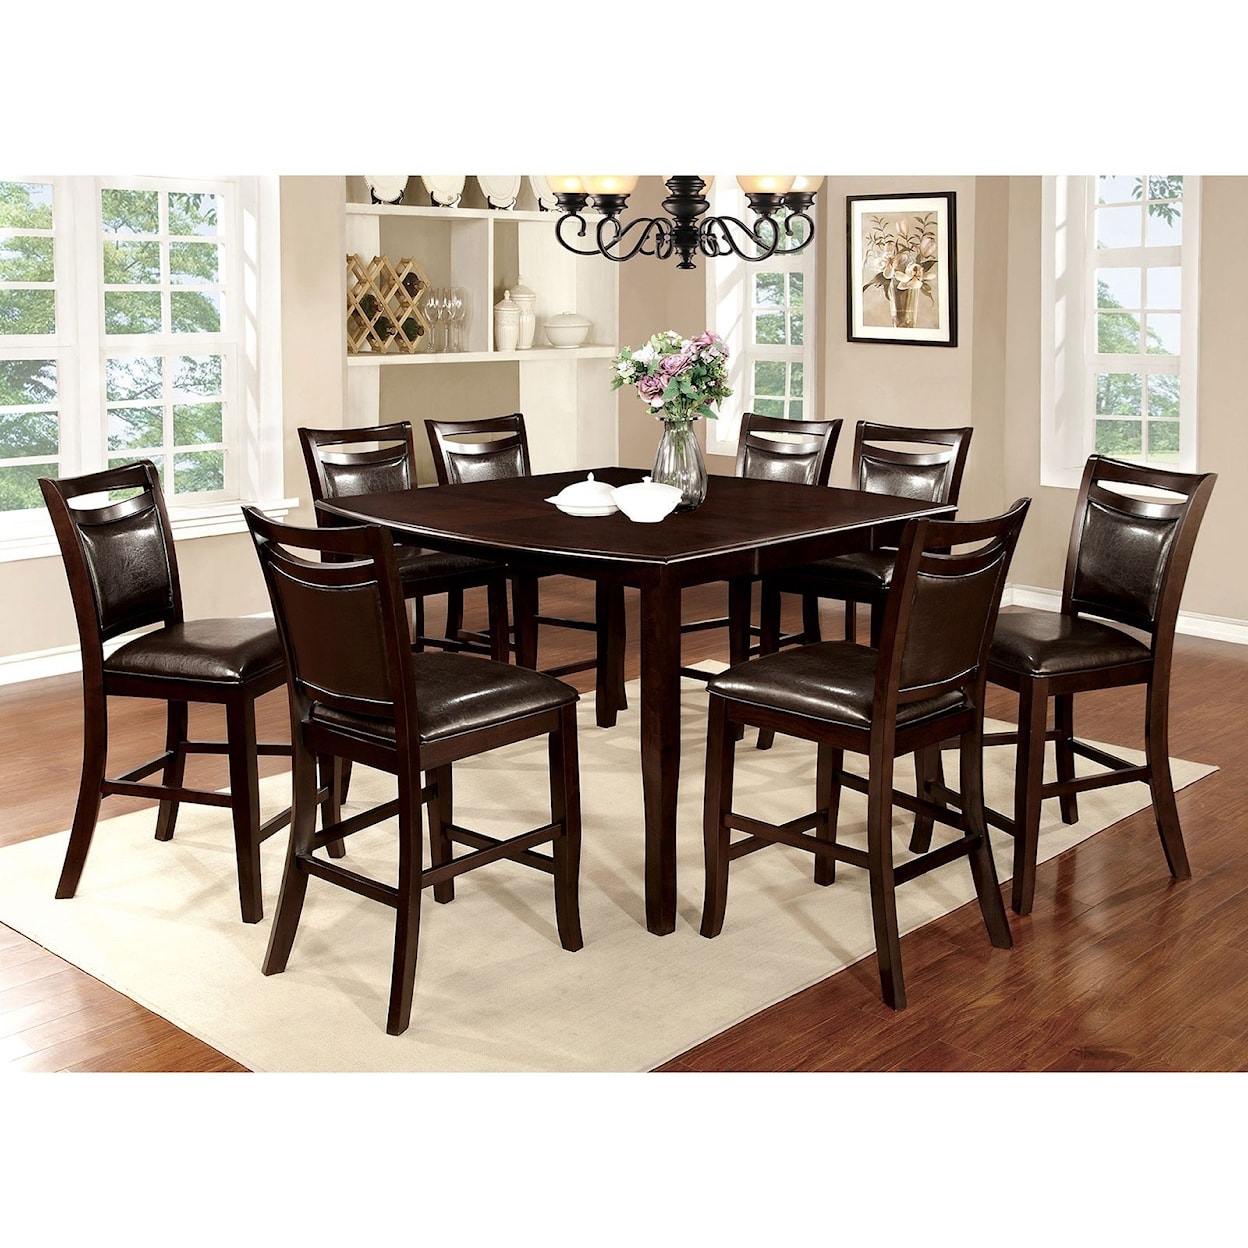 Furniture of America Woodside II Set of 2 Counter Height Chairs